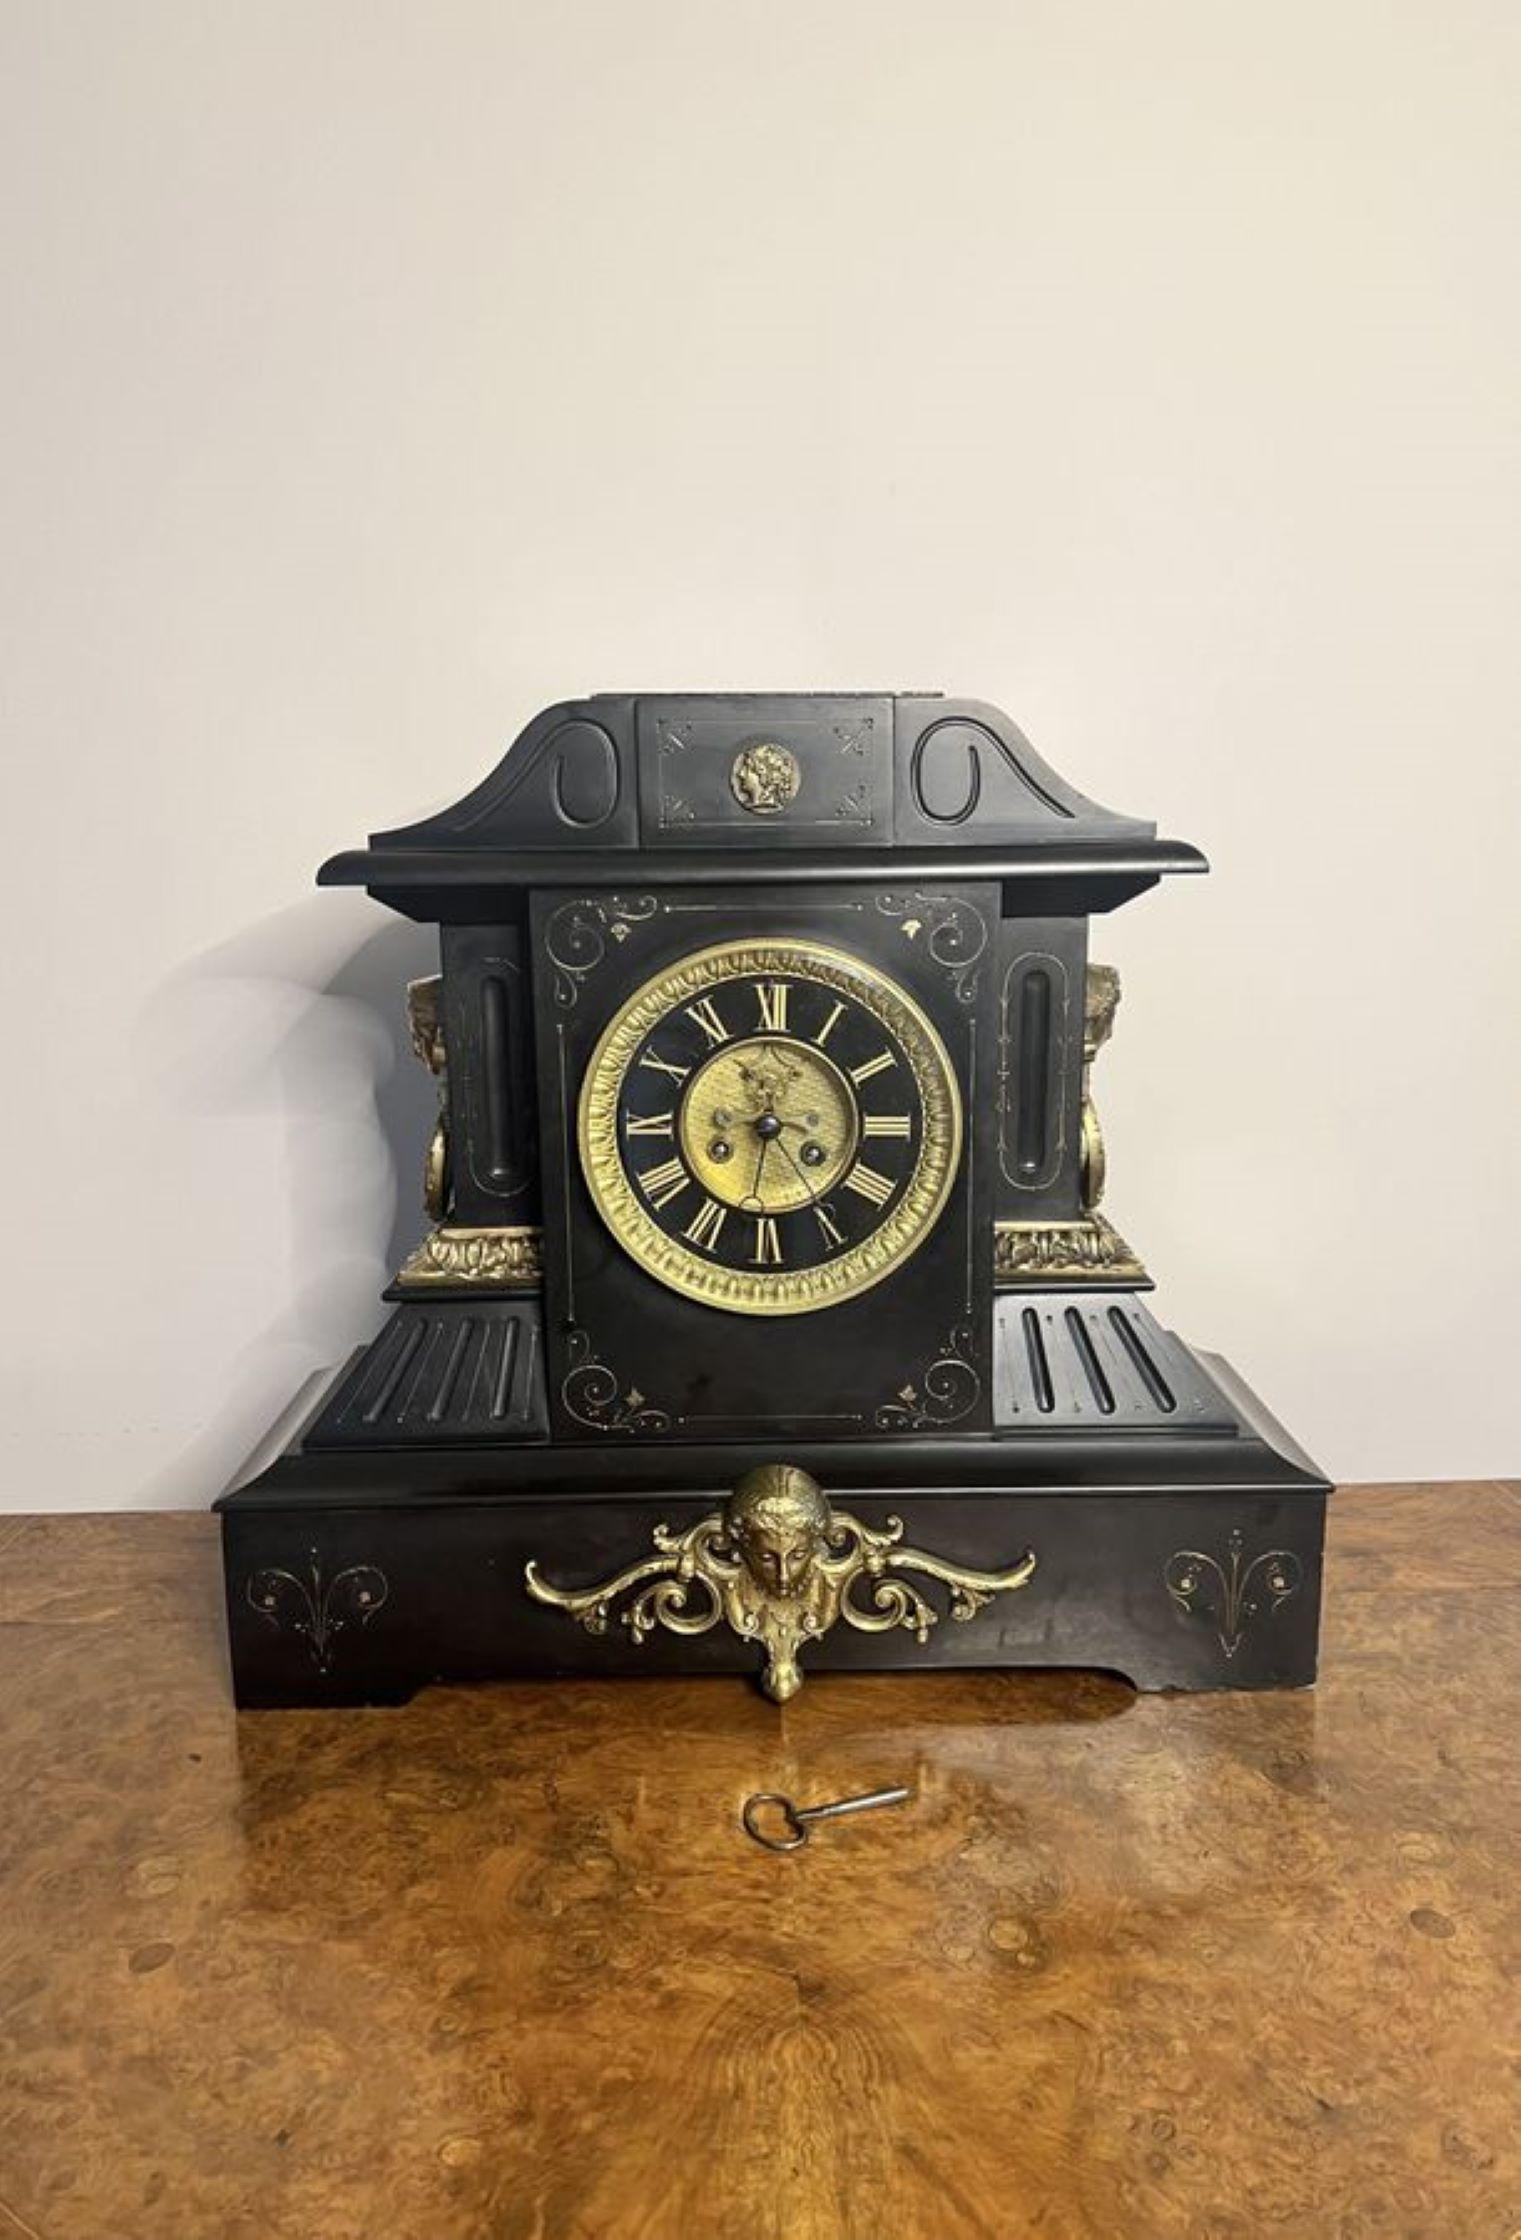 Outstanding quality large antique Victorian marble mantle clock. Having an outstanding quality marble and ornate gilded brass case, with an 8 day movement striking the hour & half hour on a gong, having a black and gold dial with Roman numerals, a